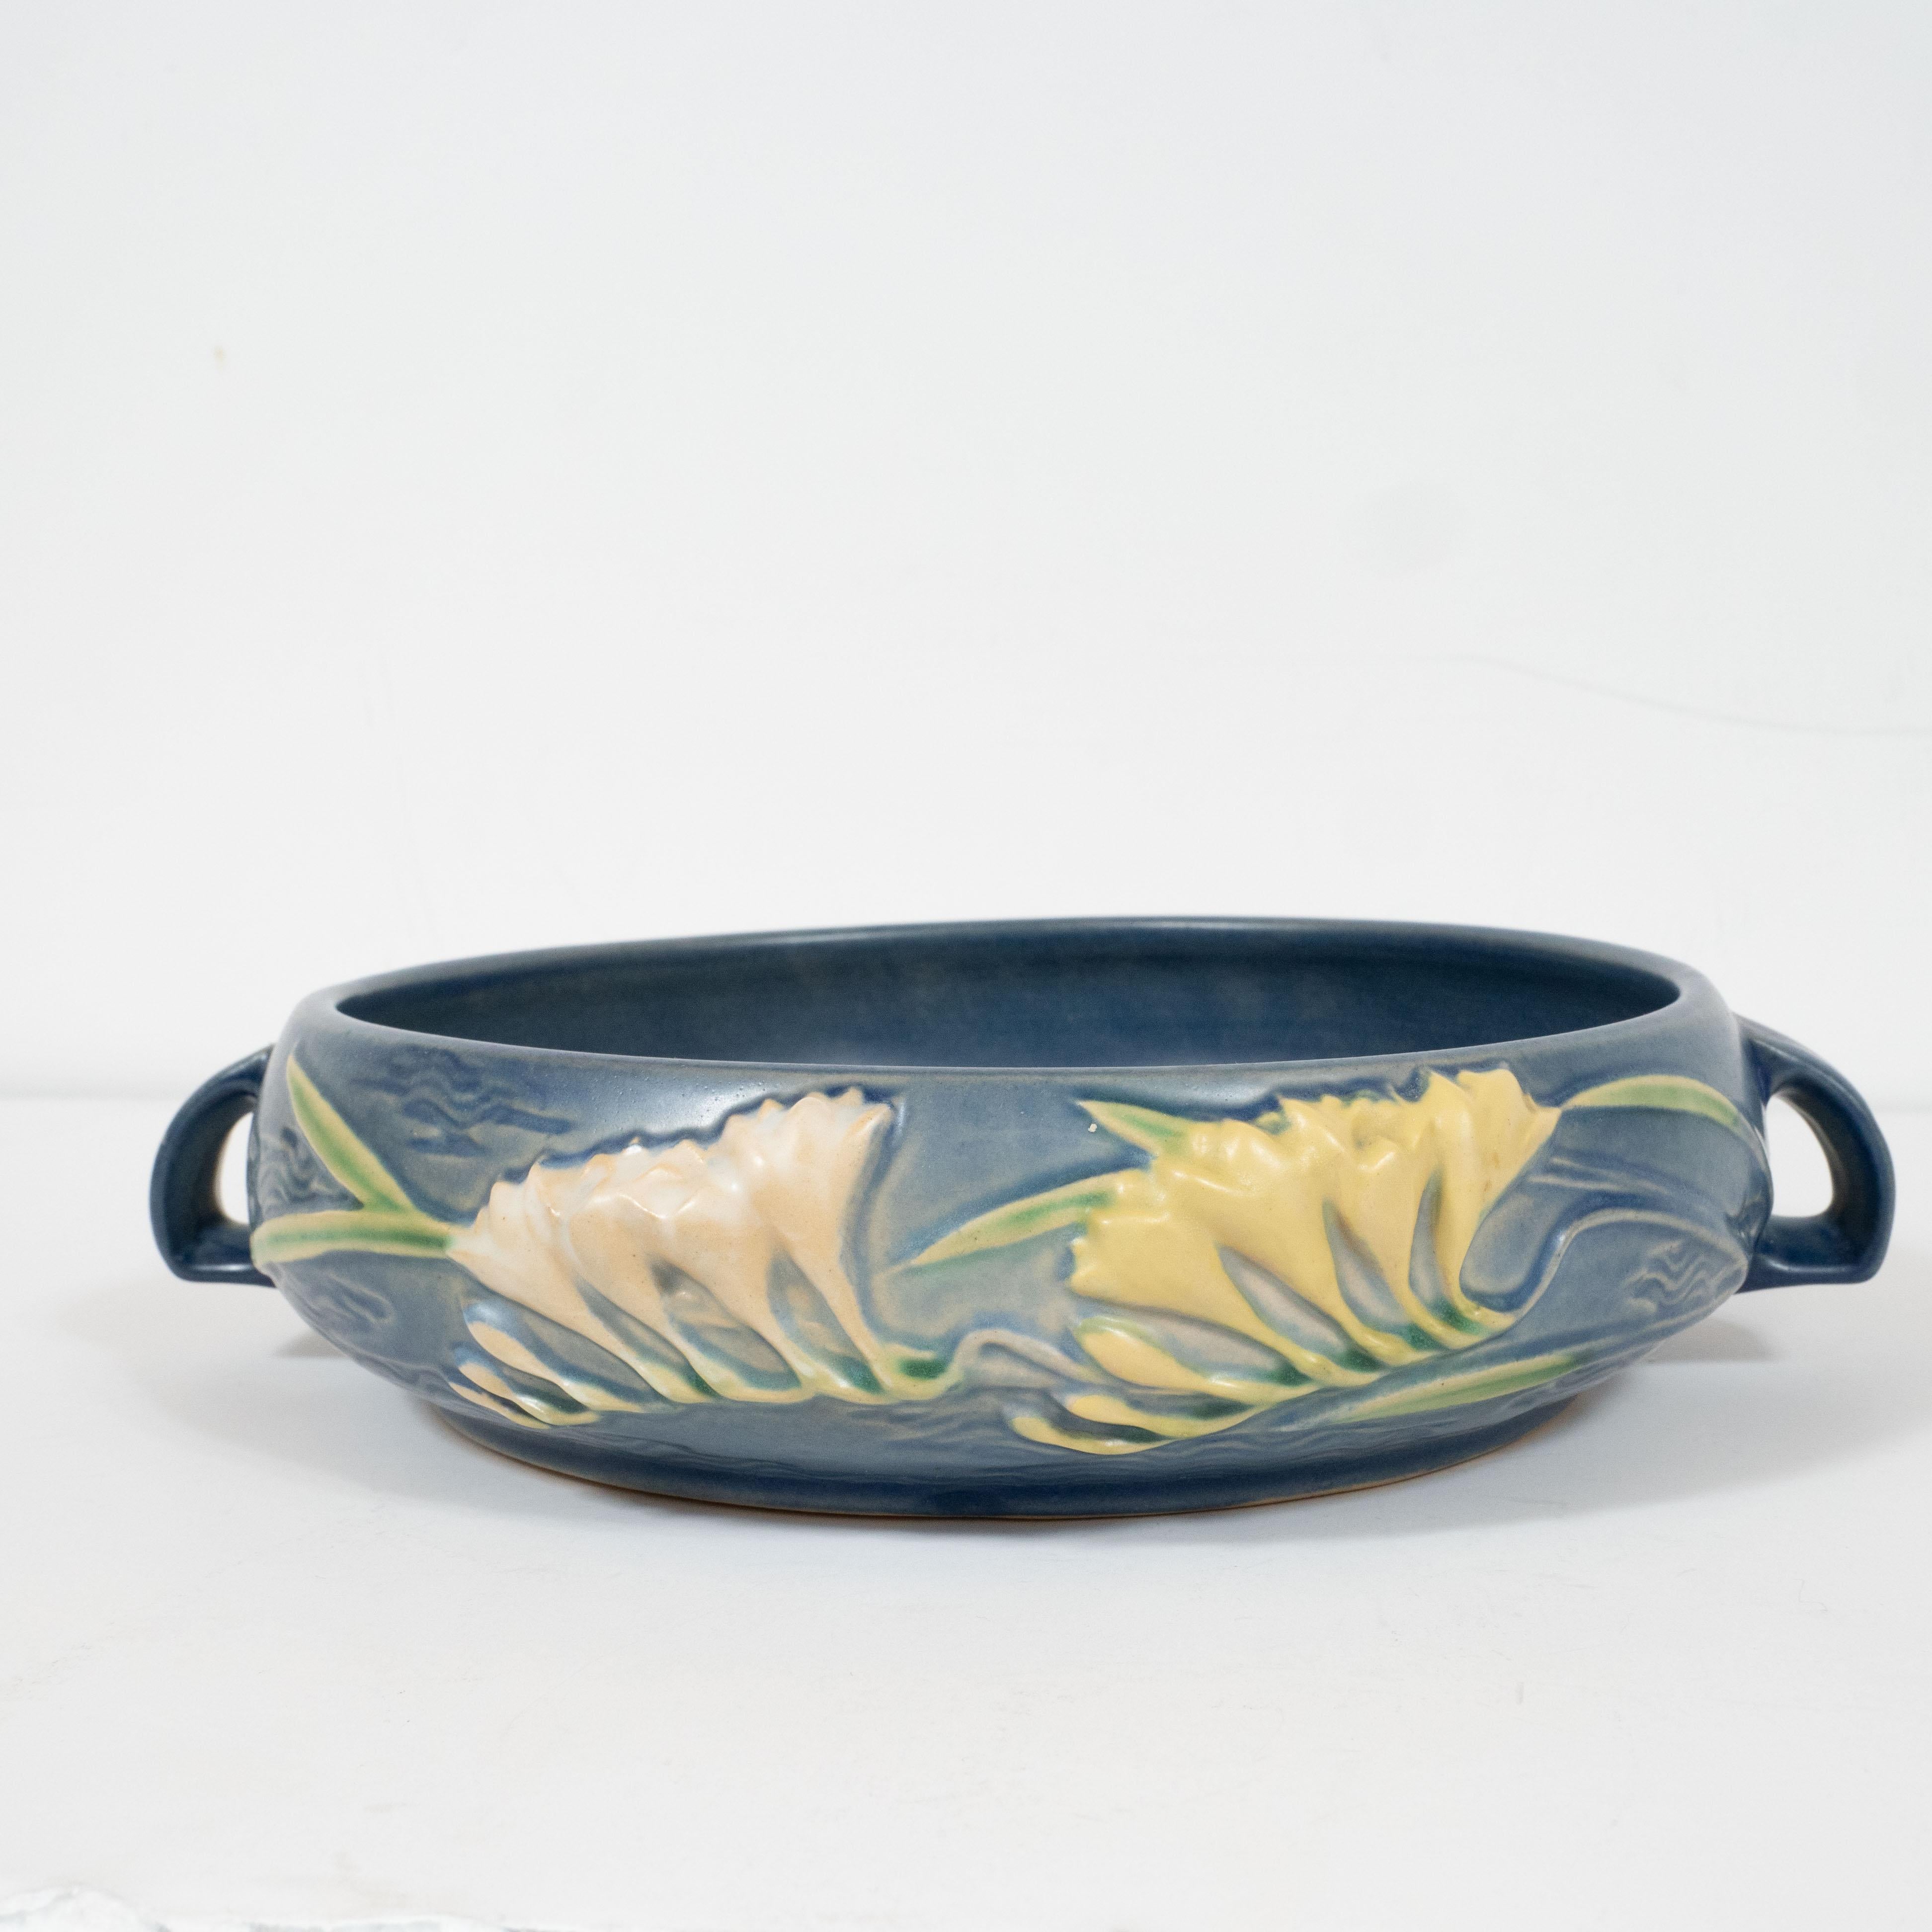 This elegant Art Deco bowl was realized by the esteemed maker Roseville Pottery in the United States, circa 1930. It features a bowed circular body in a rich indigo hue with lily of the valley flowers presented in relief and sculptural handles.